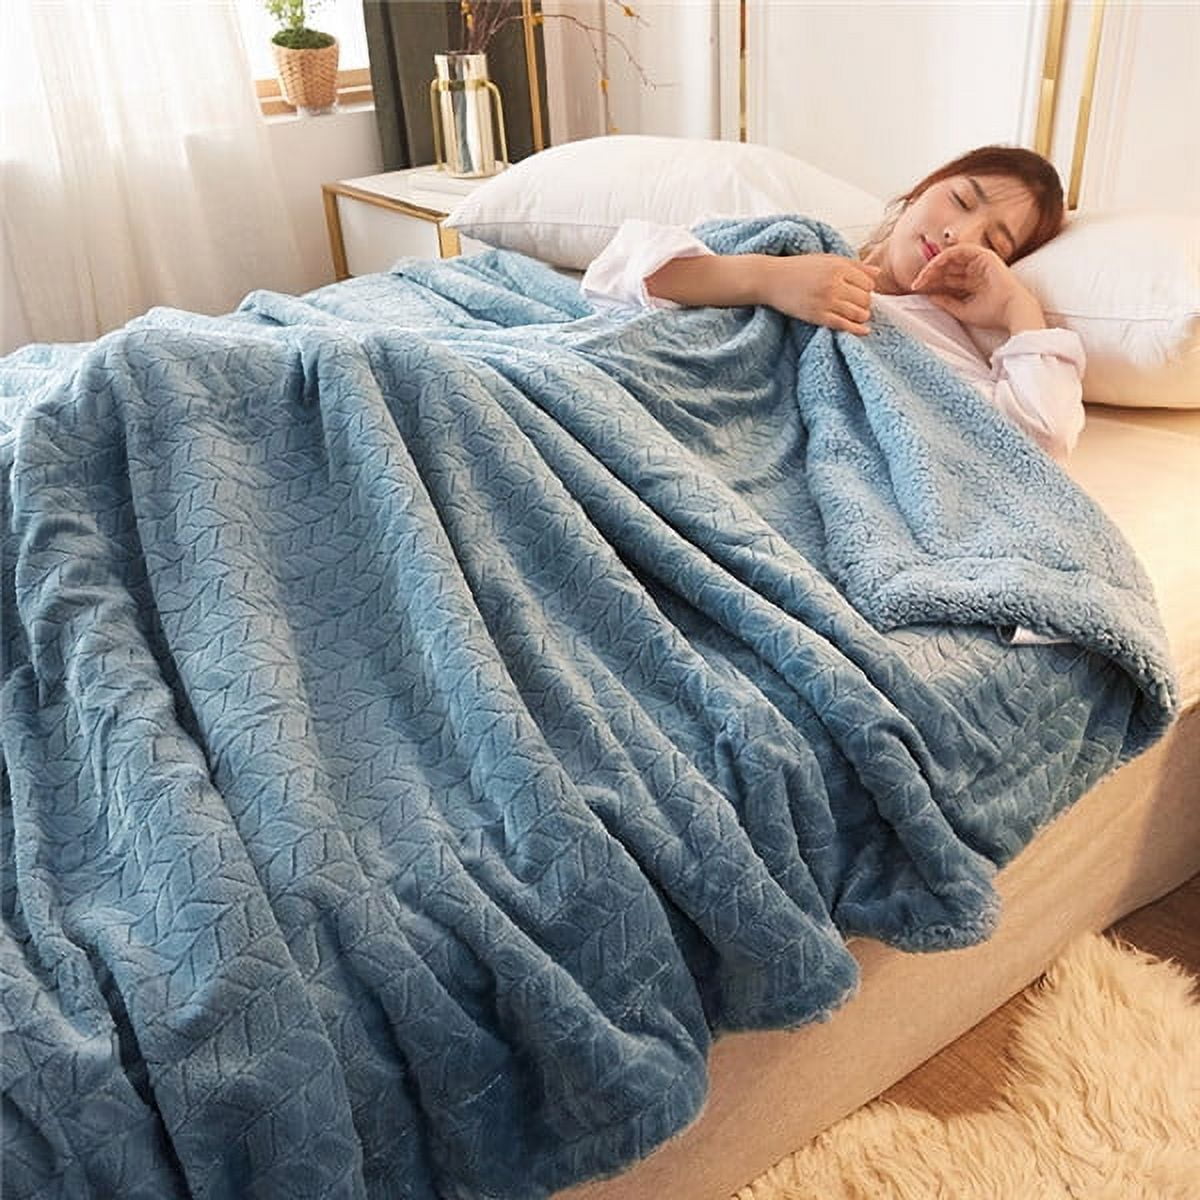 Super Warm Blanket 200x230cm Luxury Thick Blankets For Beds Fleece Blankets  And Throws Winter Adult Bed Cover Ns2